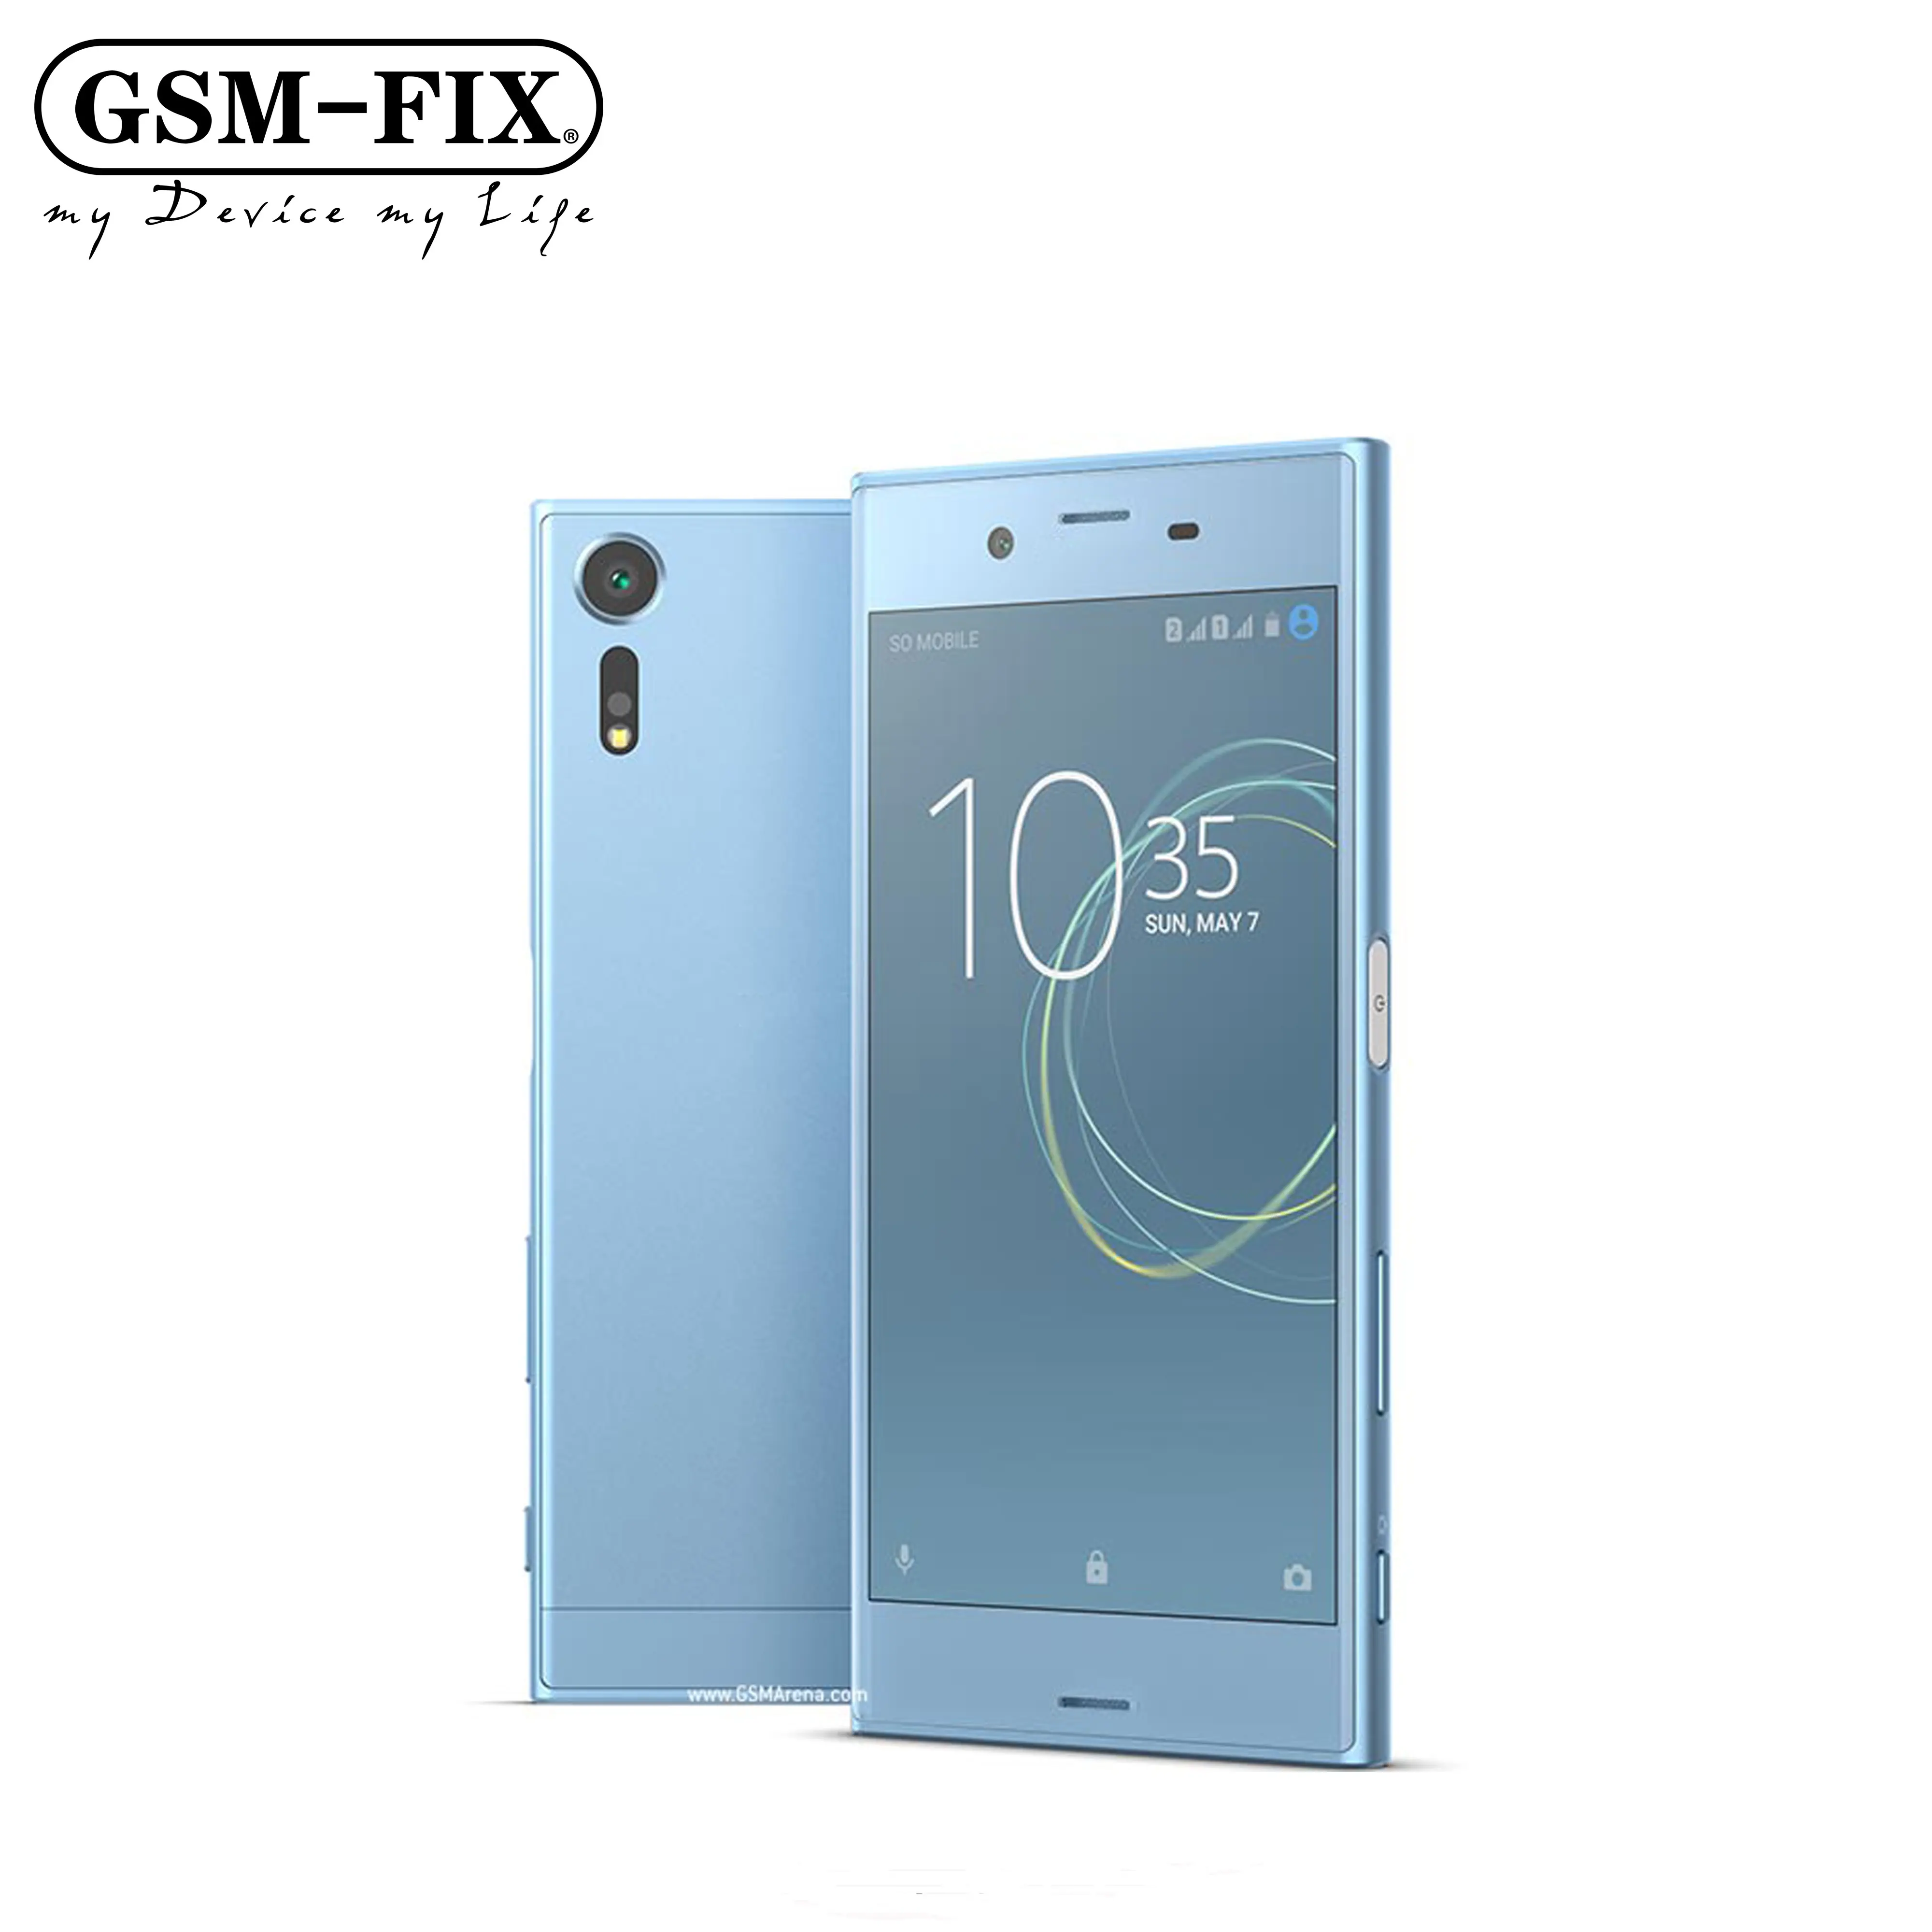 GSM-FIX For Sony Xperia XZs G8232 Dual SIM Cell Phone 4GB RAM 64GB ROM 19MP Snapdragon 820 LTE 5.2" Original Mobile Phone